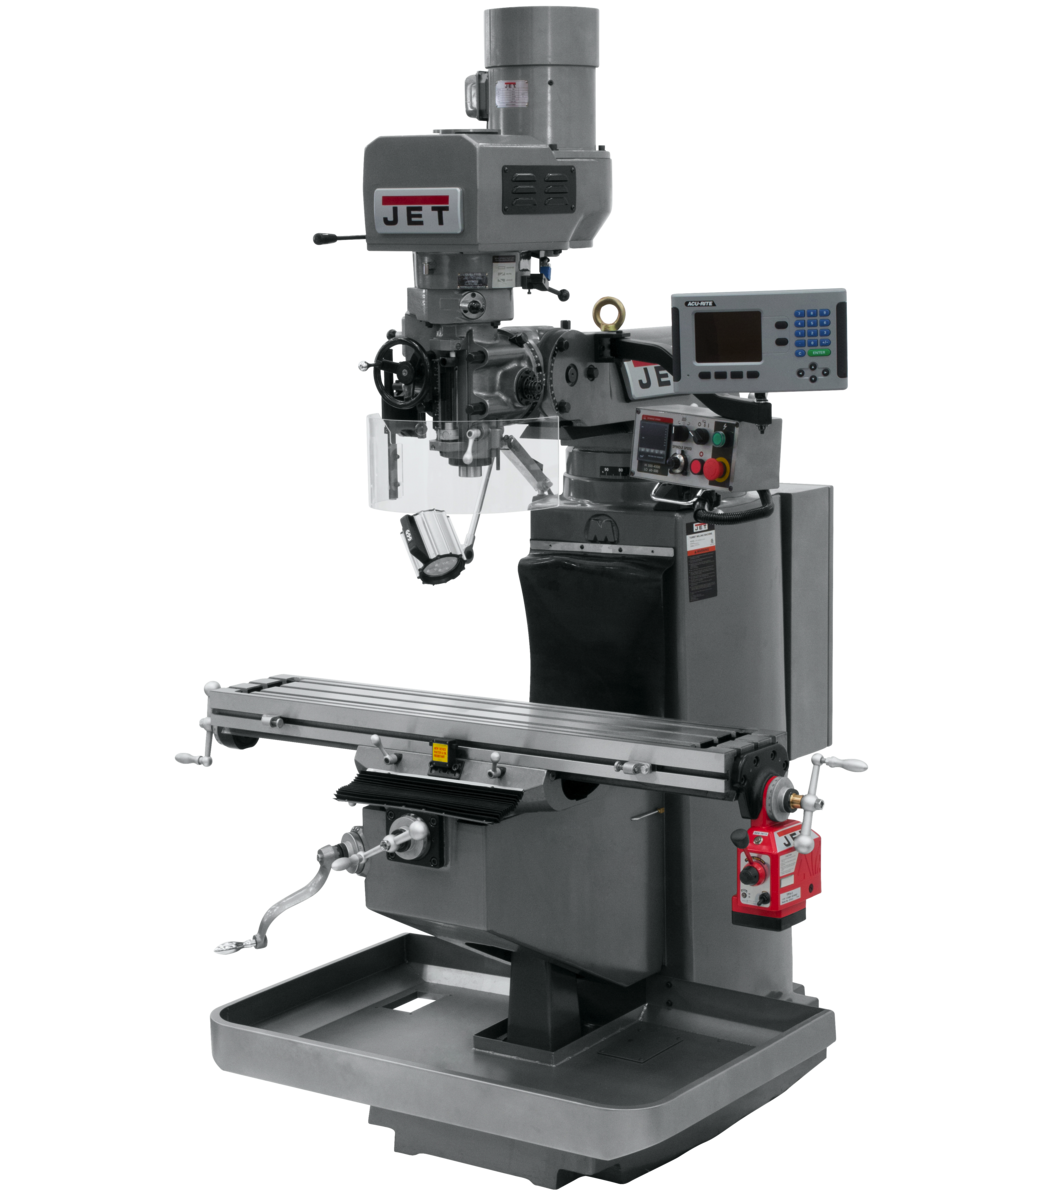 JTM-949EVS Mill With Acu-Rite 203 DRO With X-Axis Powerfeed